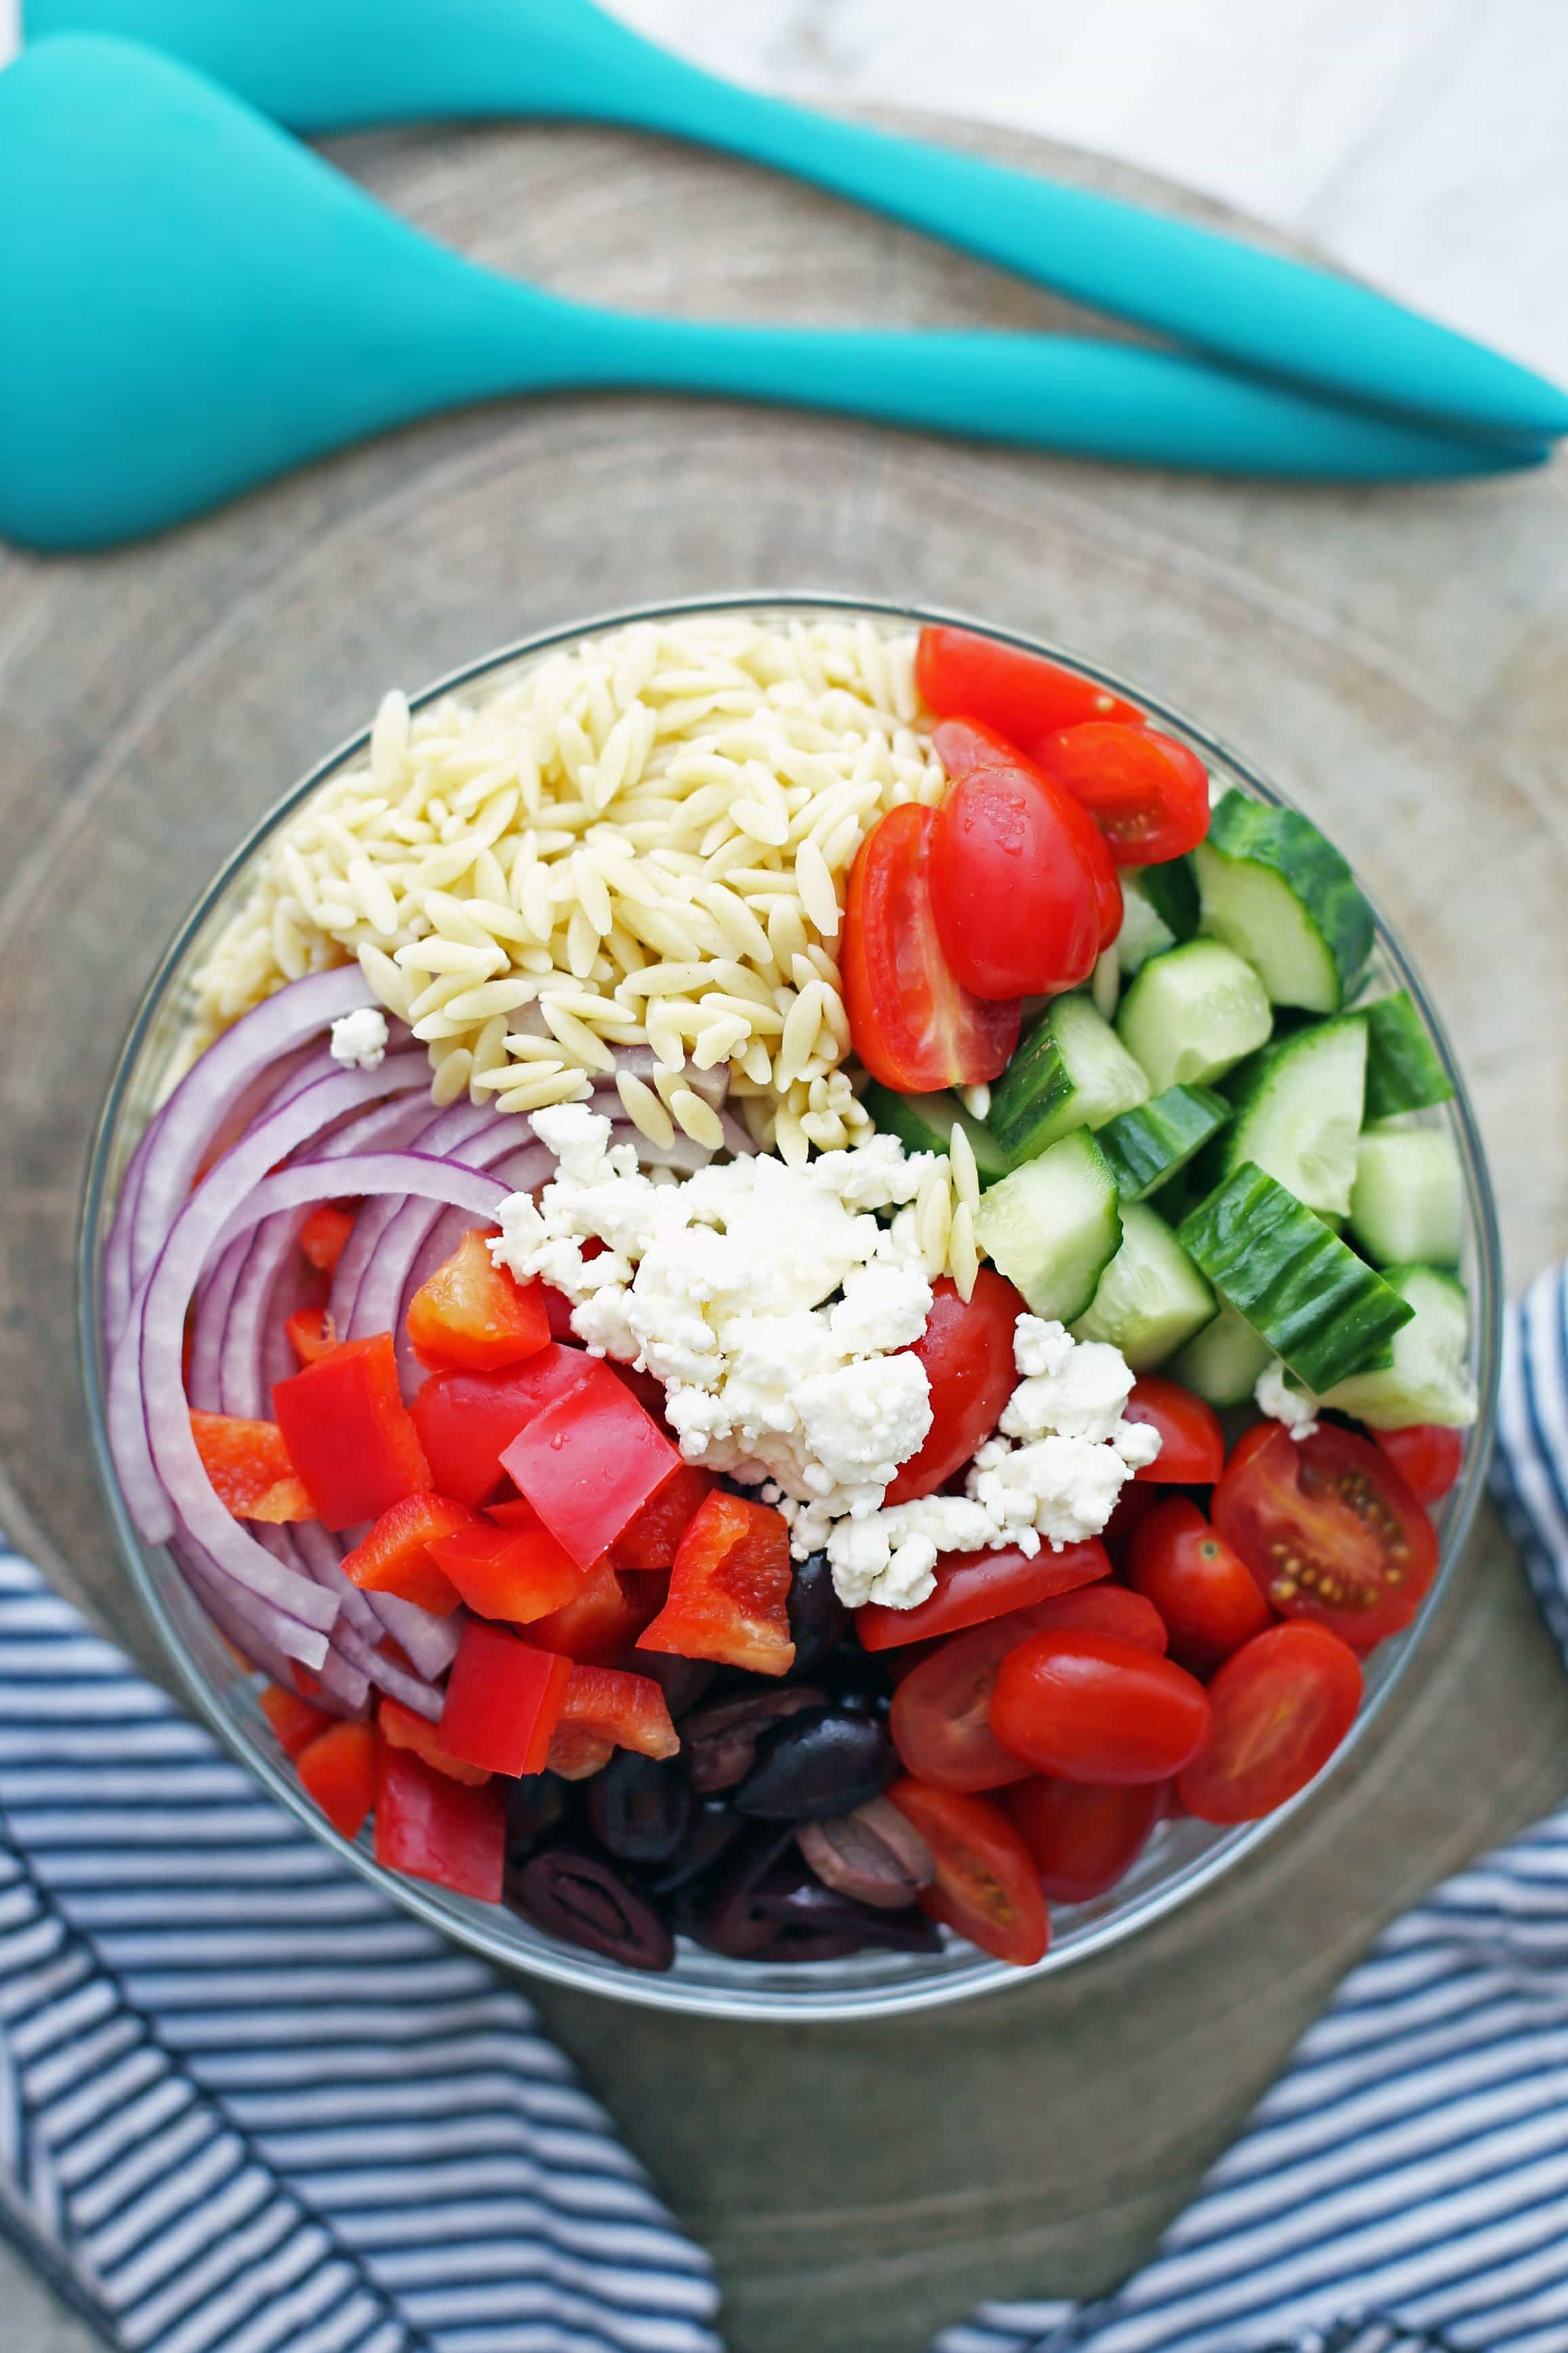 A large glass bowl containing orzo pasta, feta cheese, sliced red onions, and chopped tomatoes, olives, cucumber, and bell pepper.